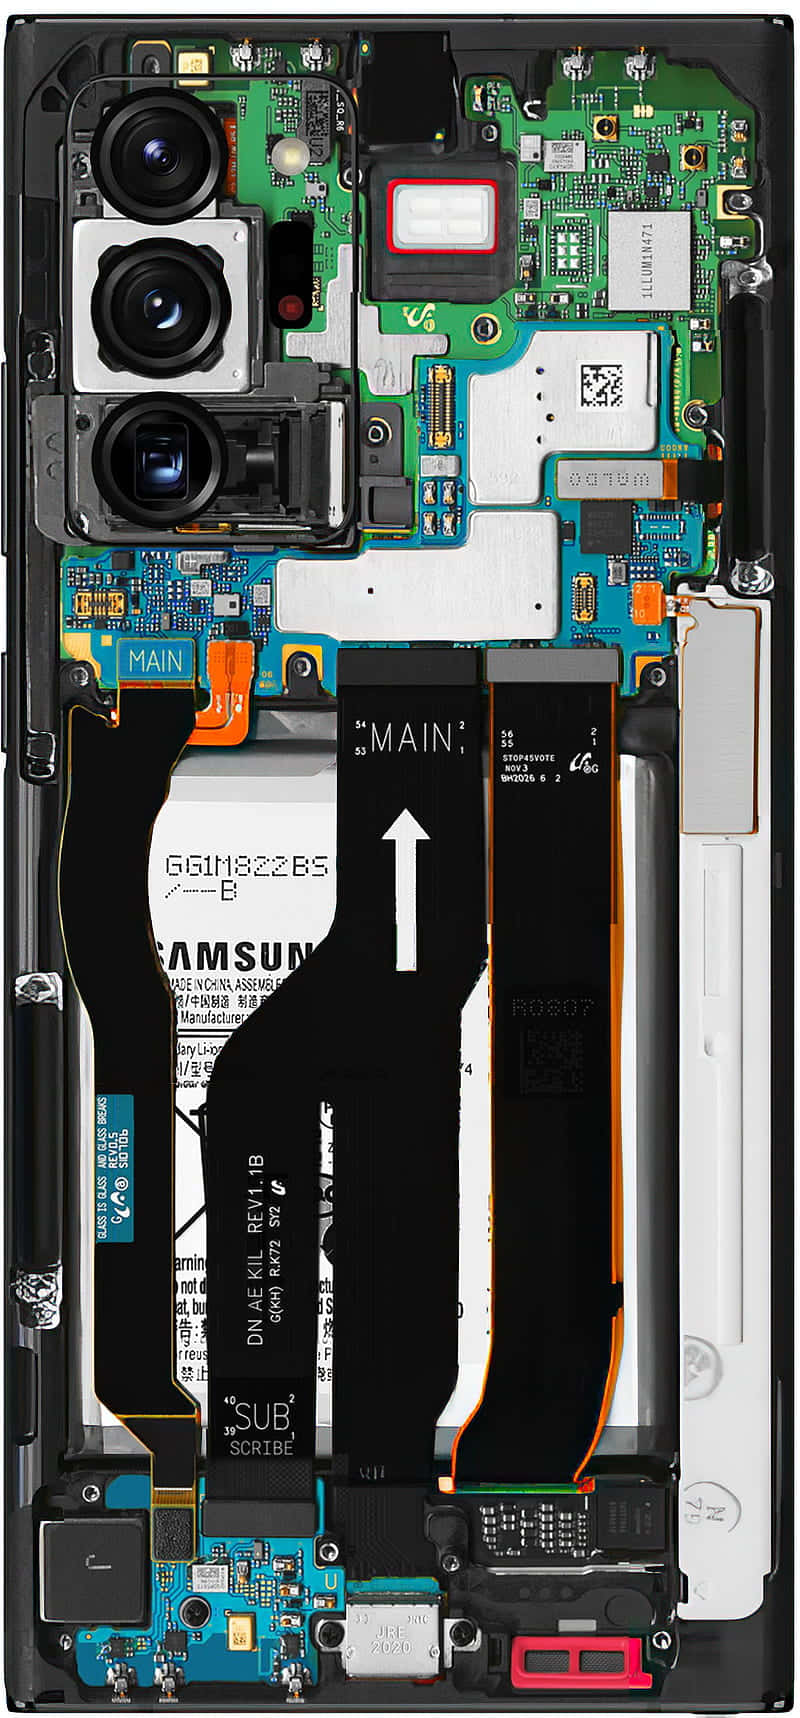 A phone with its internal parts exposed. Wallpaper